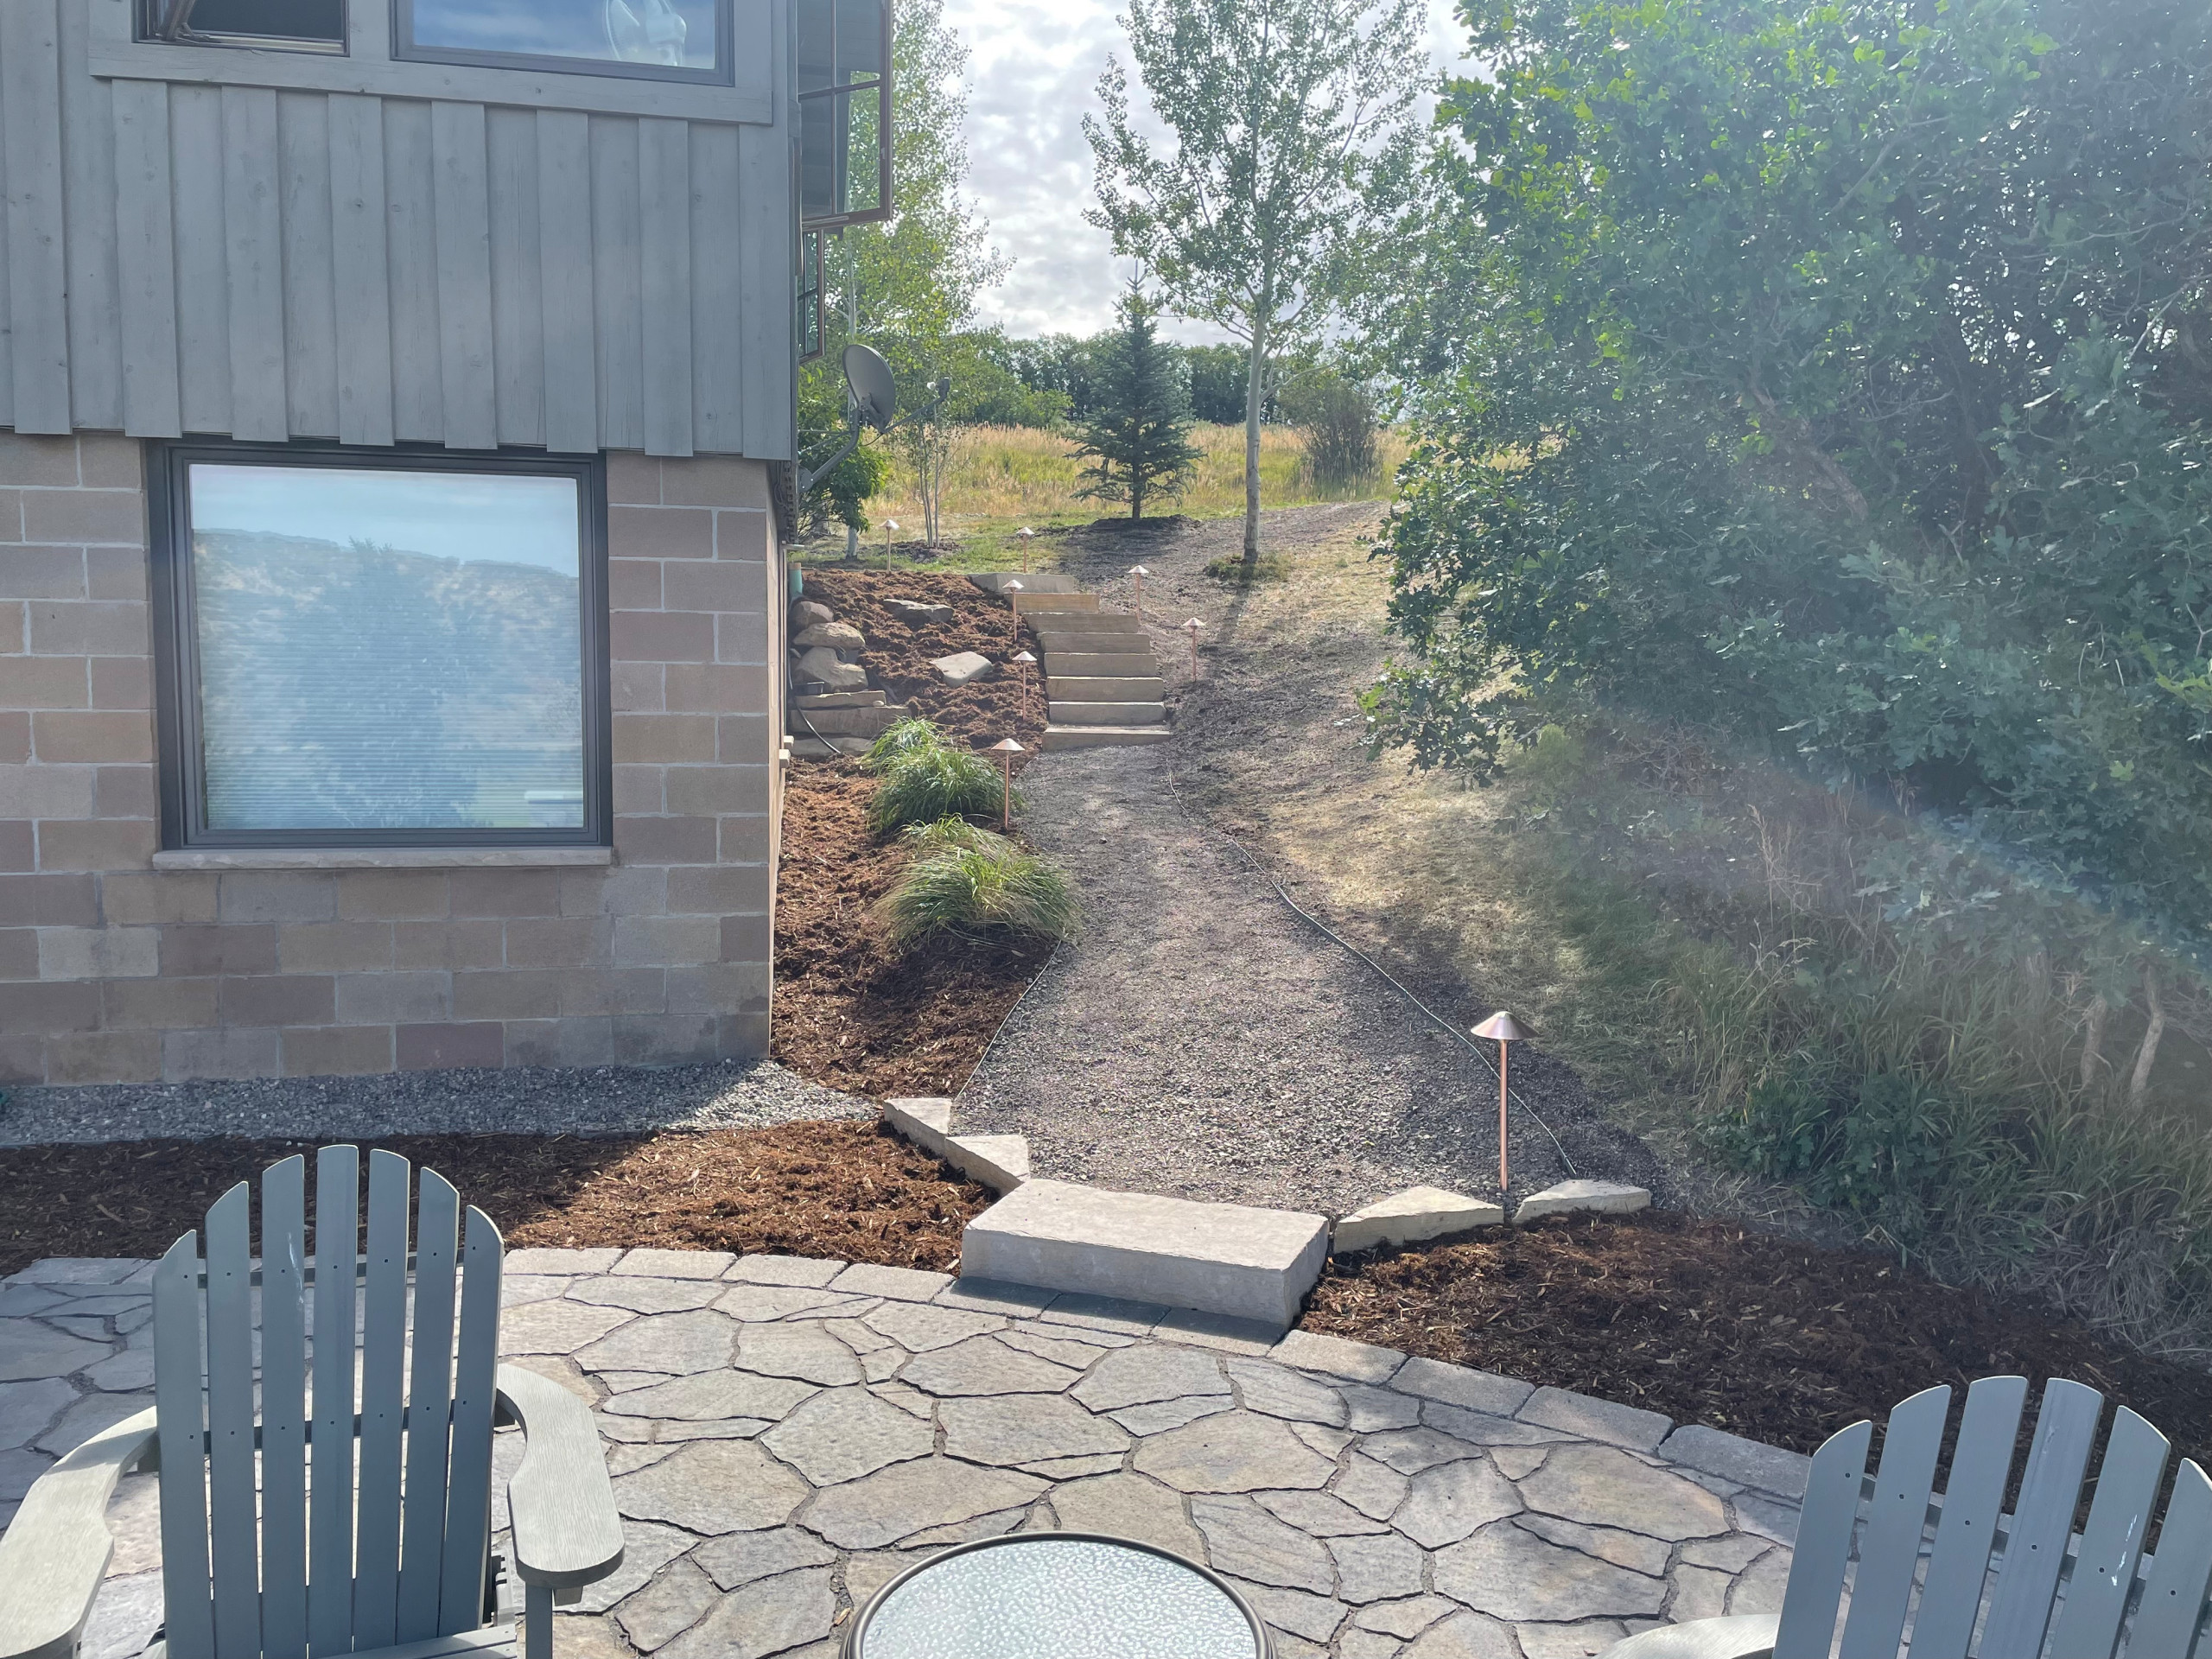 The finished path way to the patio